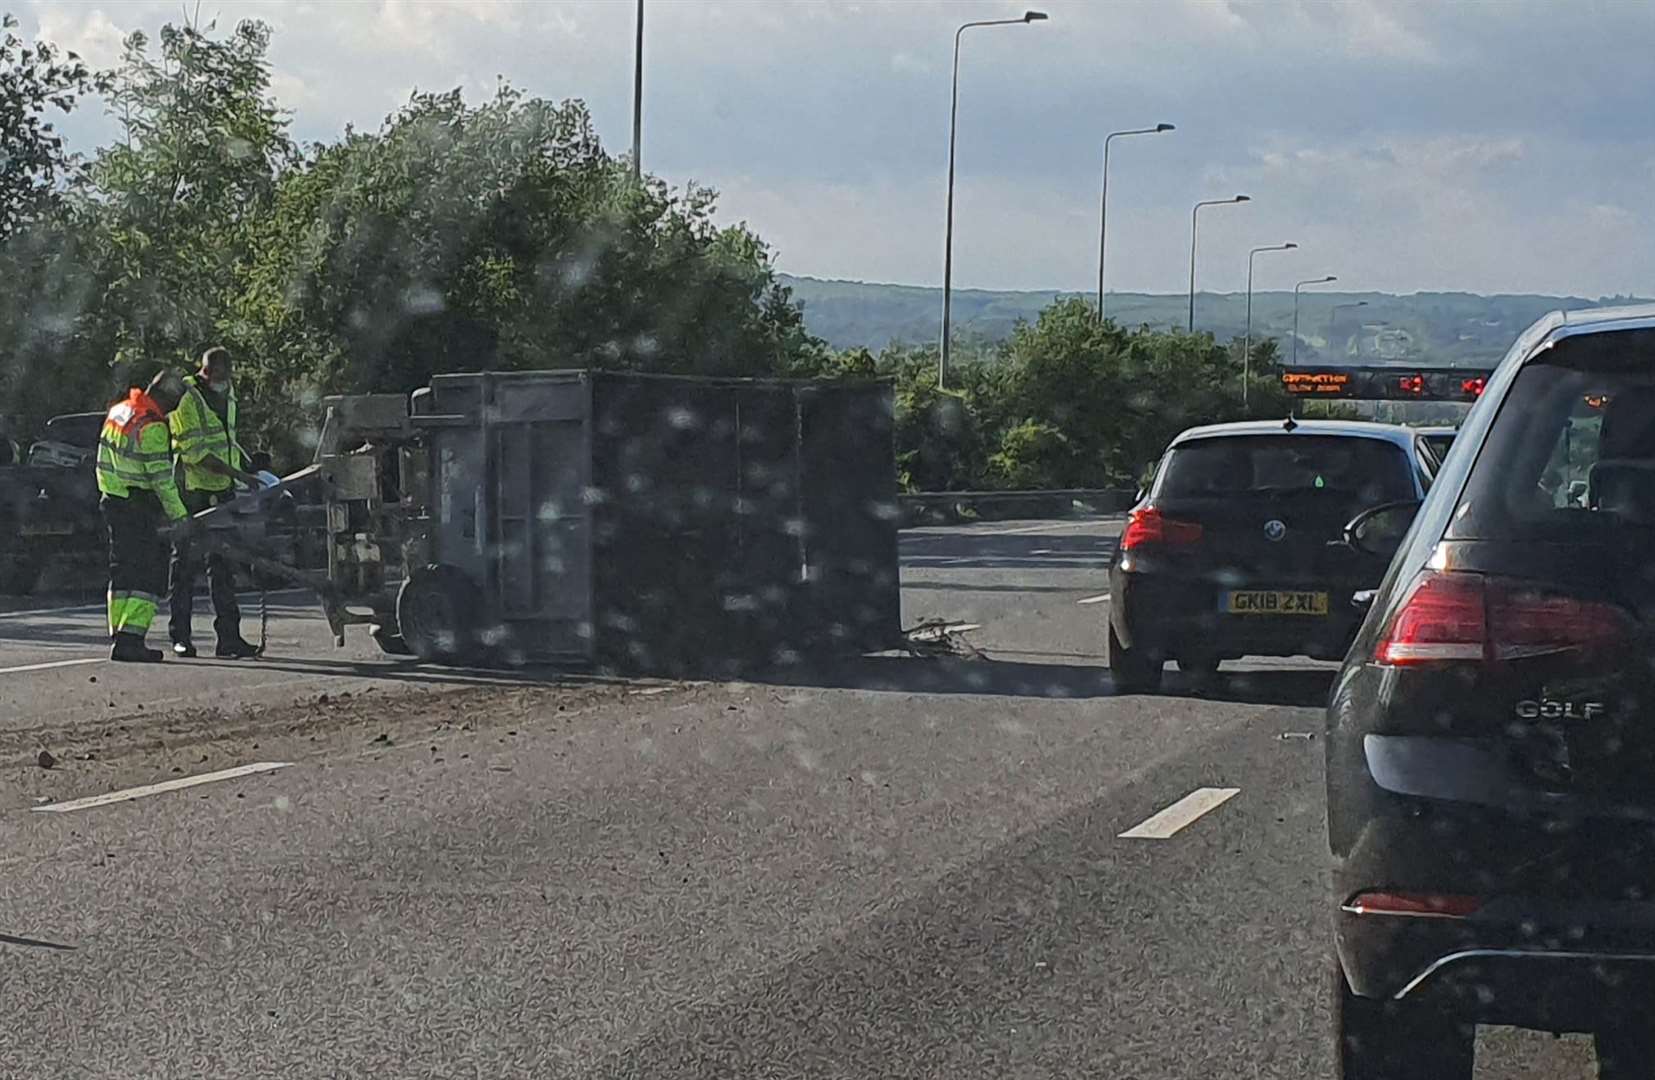 A trailer overturned on the Londonbound M2